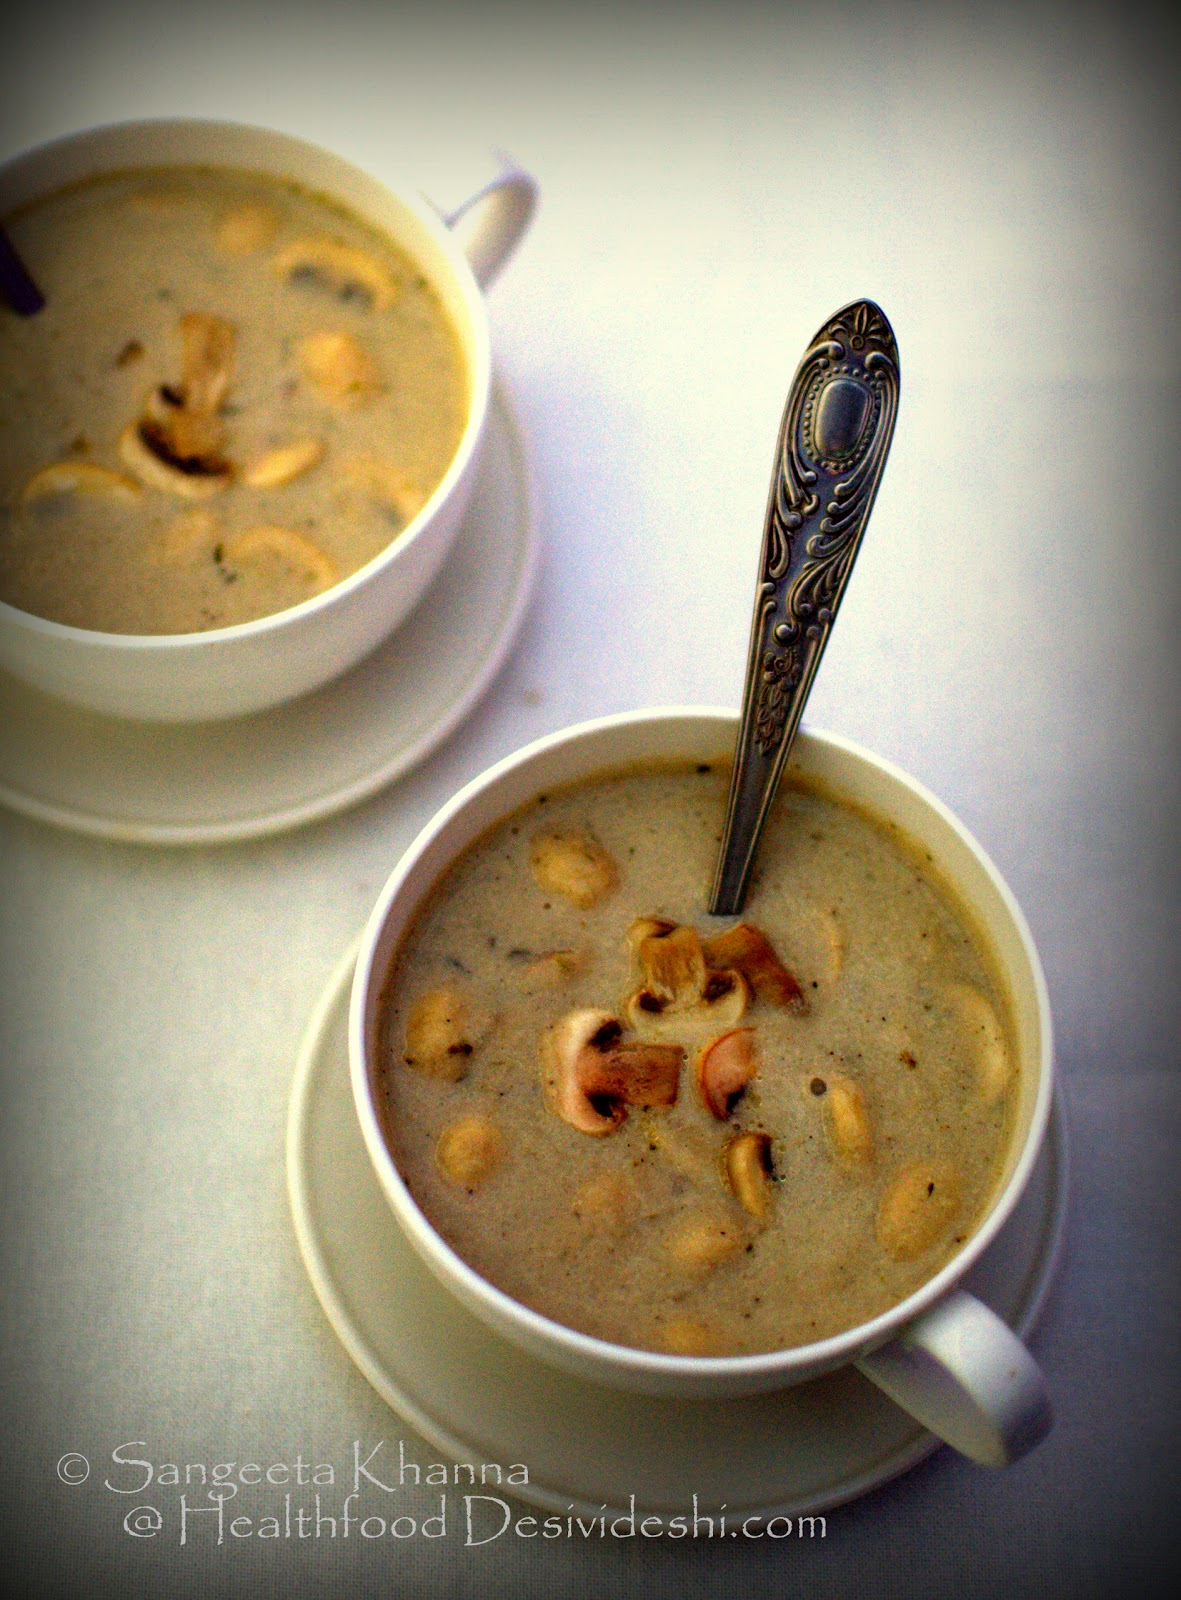 cauliflower and mushroom soup with a hint of caramalised onions | eating seasonal and local produce mindfully 